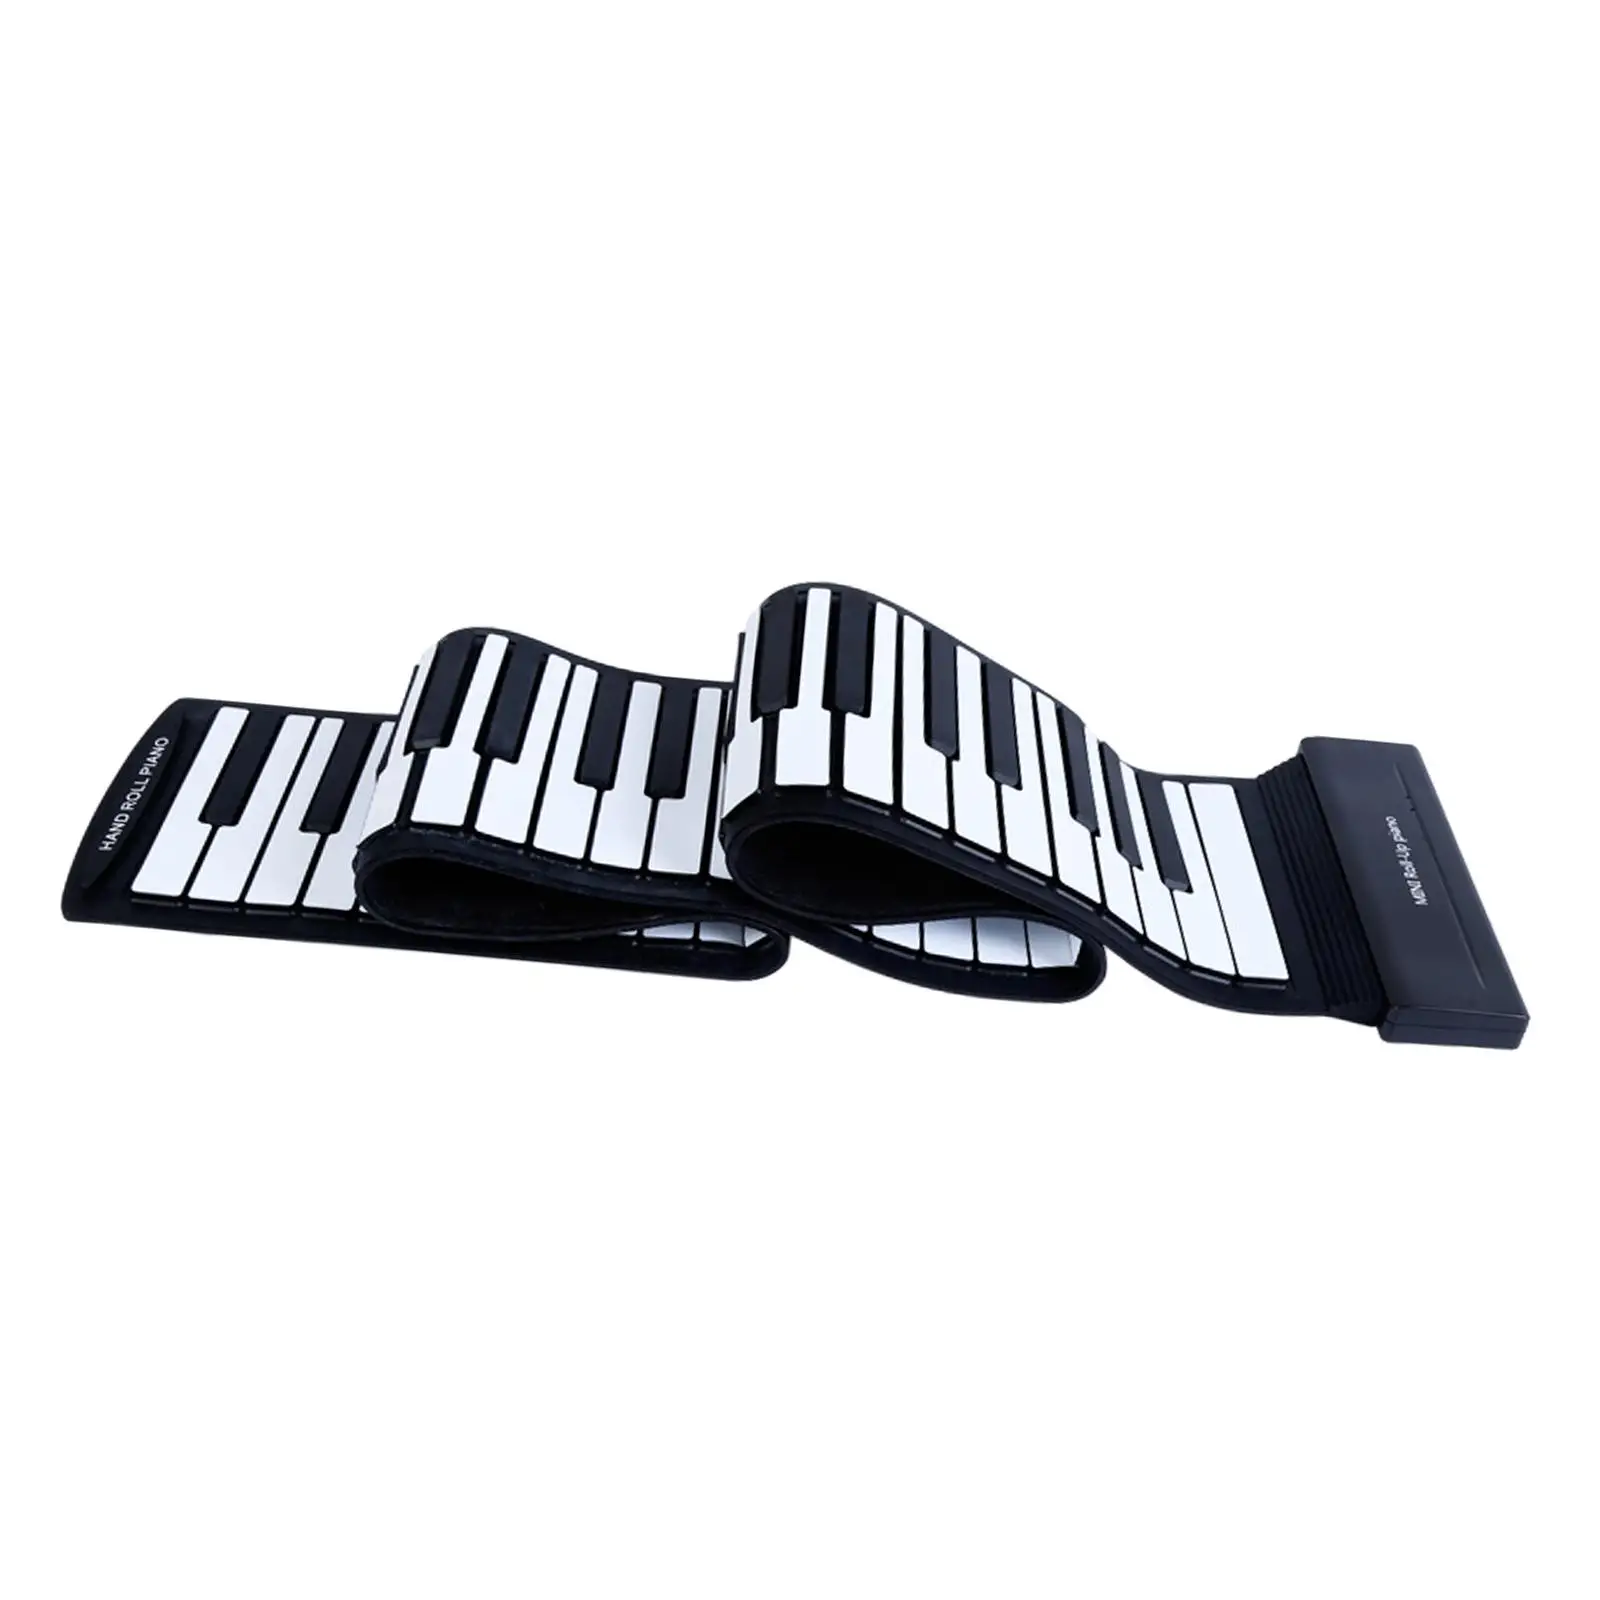 

88 Keys Roll up Piano Foldable USB Input Silicone Digital Music Toy for Living Room Classroom Teaching Recording Home Children